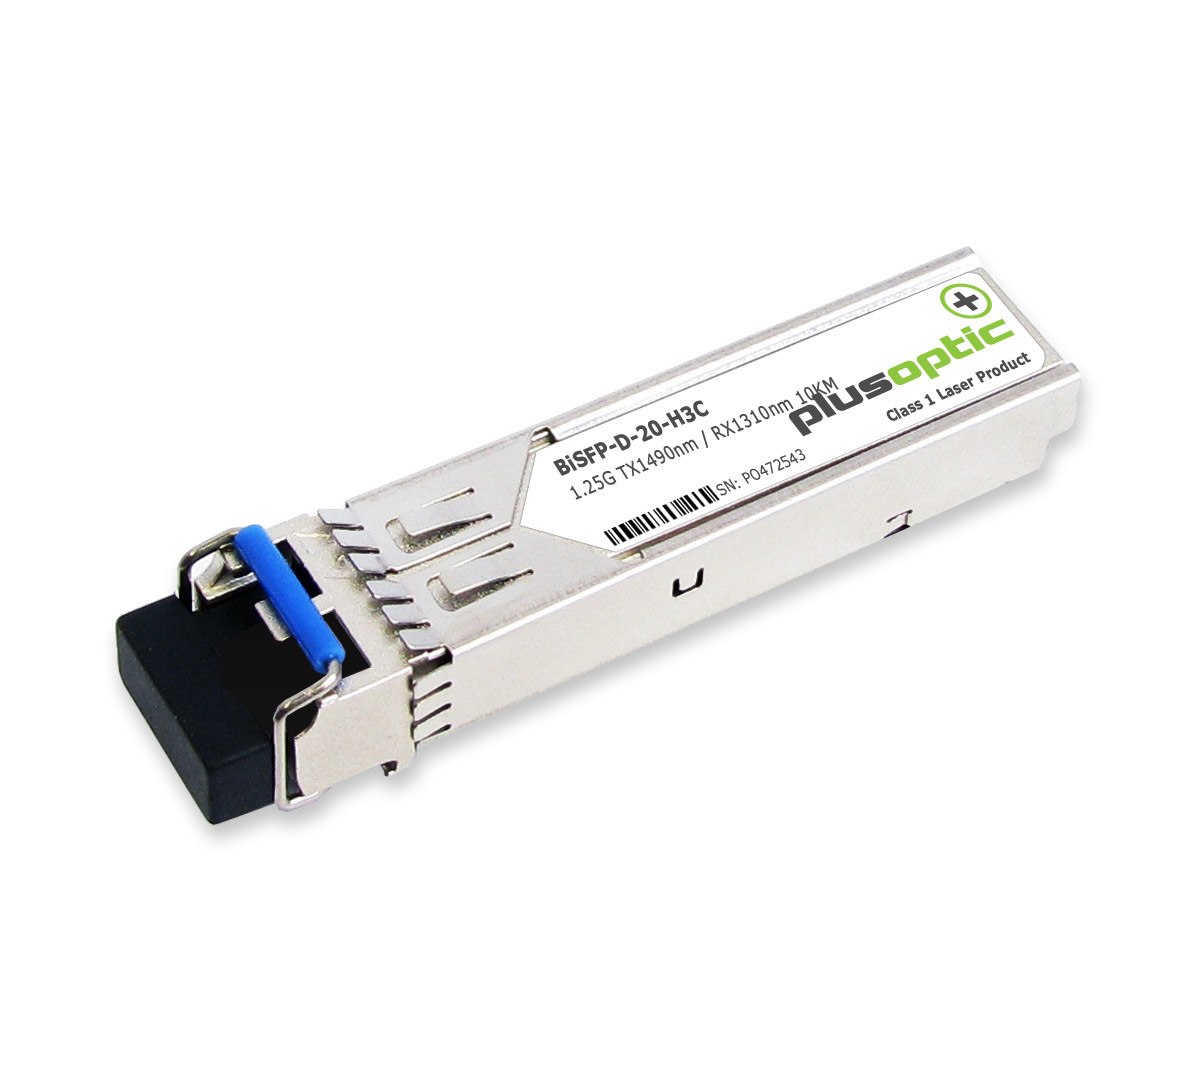 PlusOptic HP / H3C Compatible (JD098B) 1.25G, BiDi SFP, TX1490nm / RX1310nm, 20KM Transceiver, LC Connector For SMF With Dom | PlusOptic Bisfp-D-20-H3c